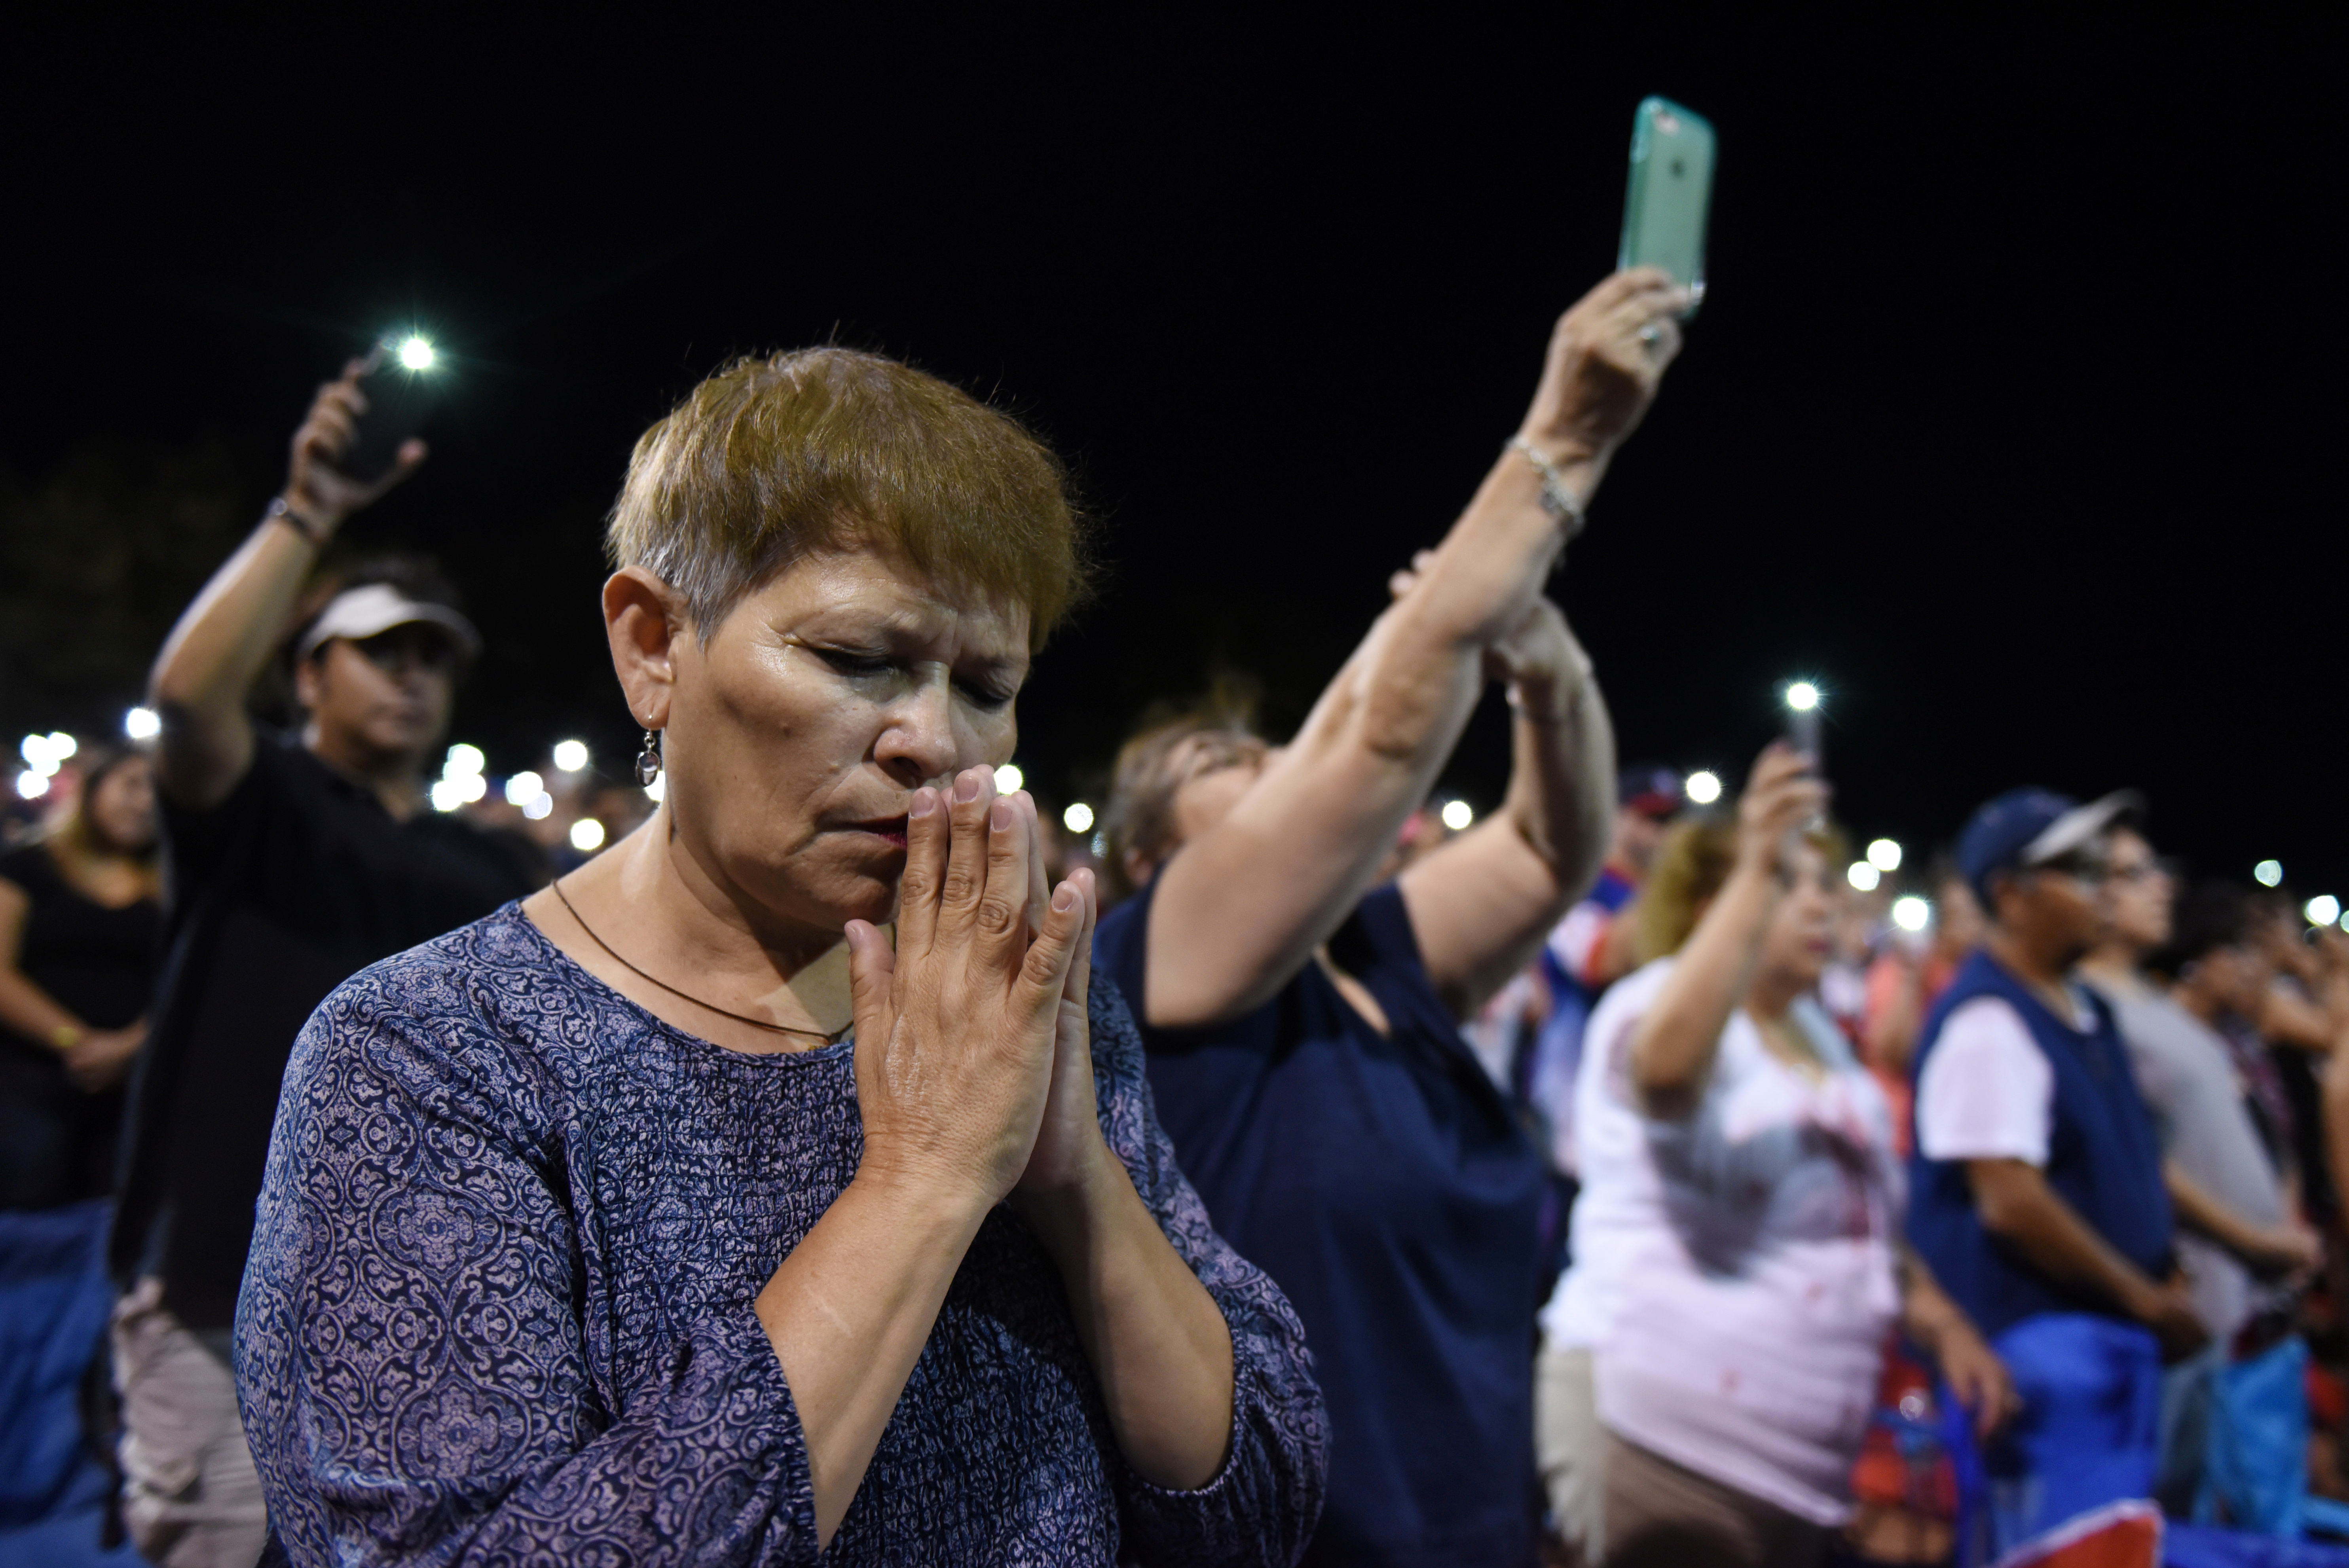 El Paso bishop meets with victims and family members of Texas mass shooting